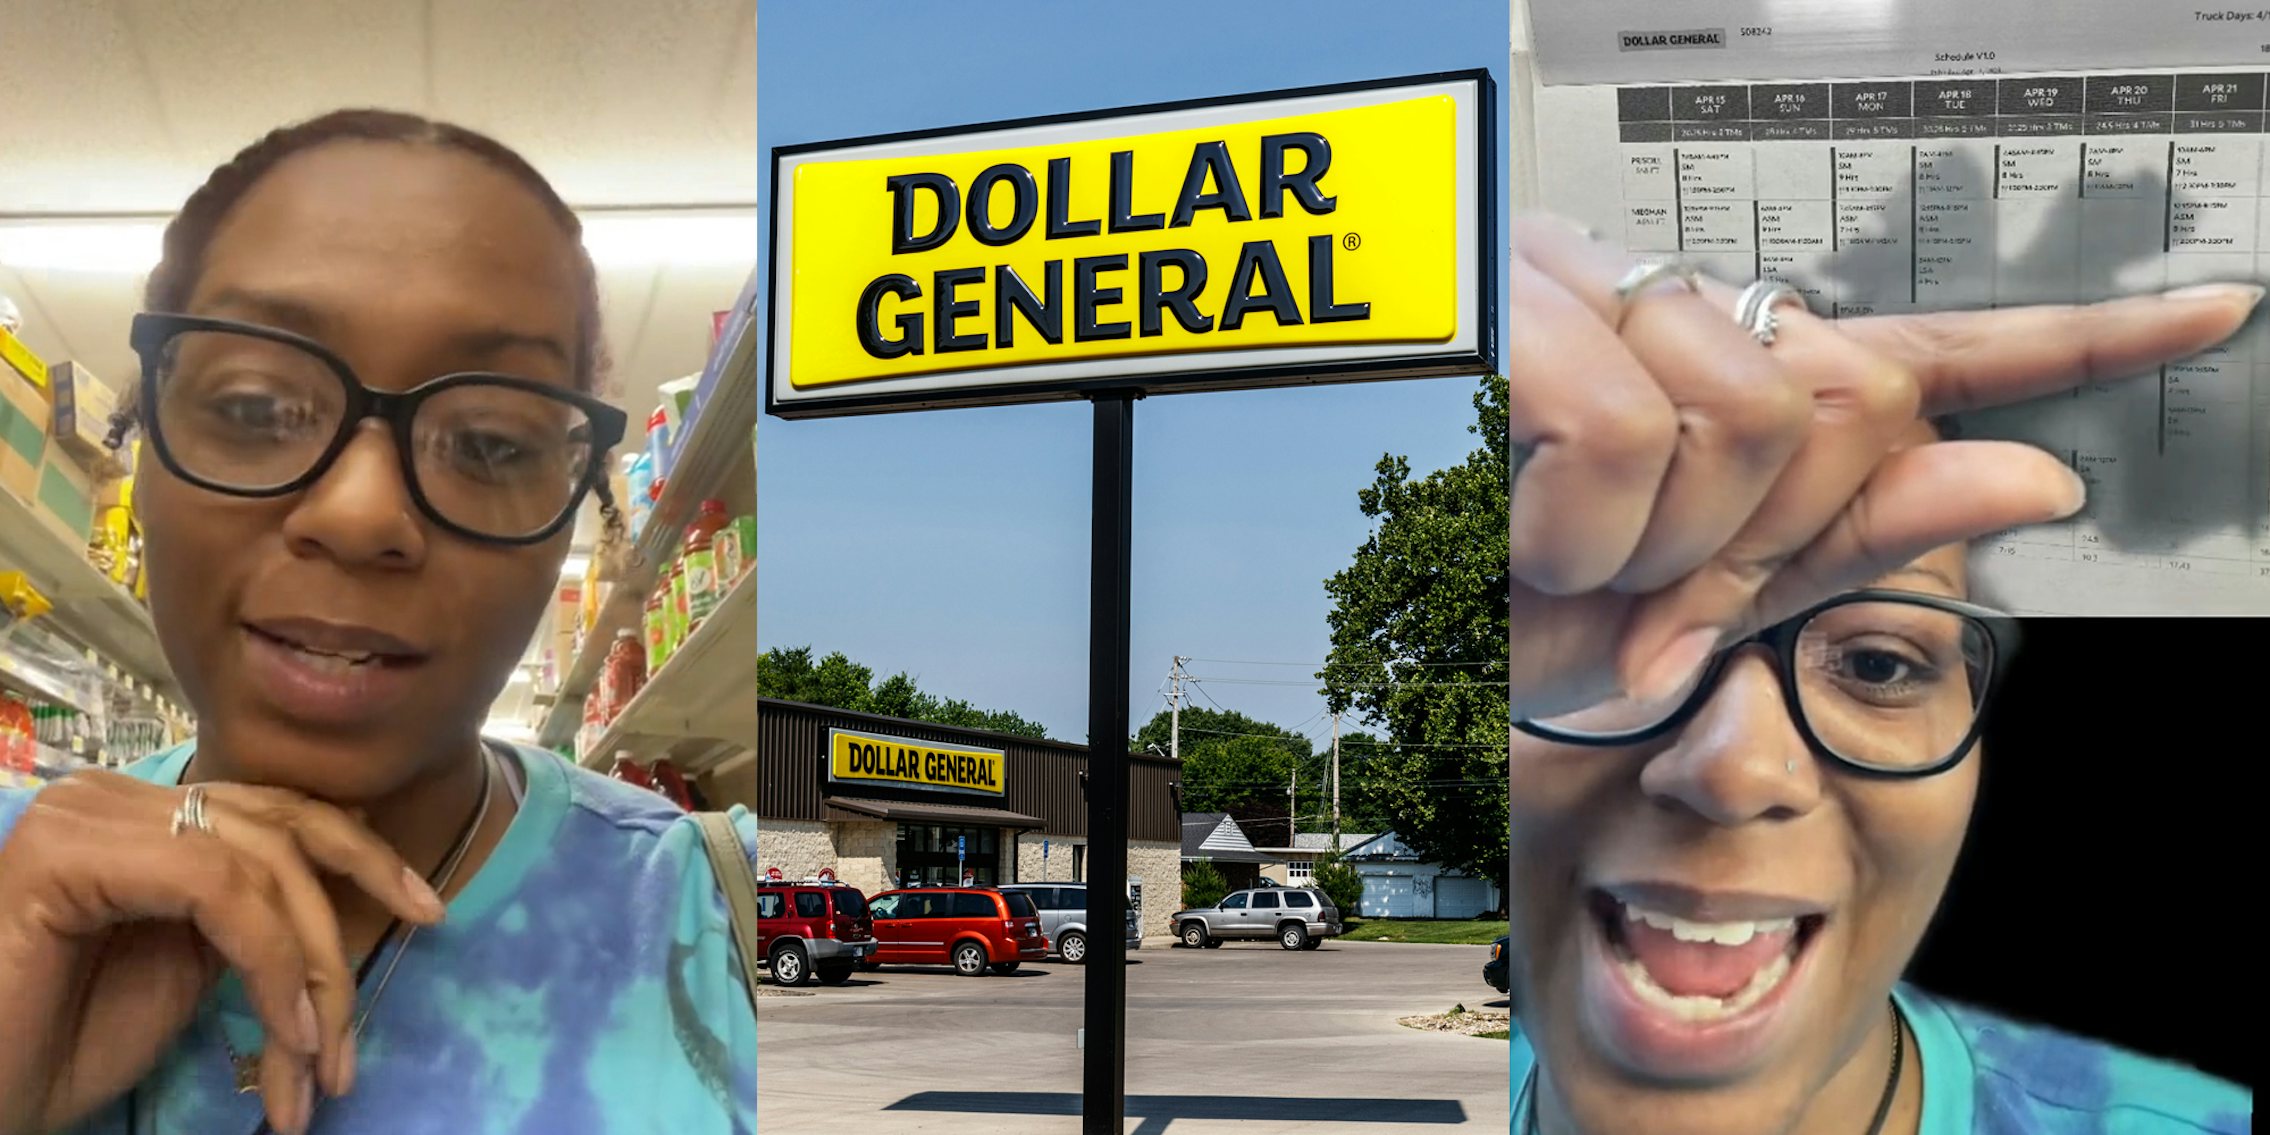 Dollar General Worker Says They've Been Reduced to 10 Hours Per Week